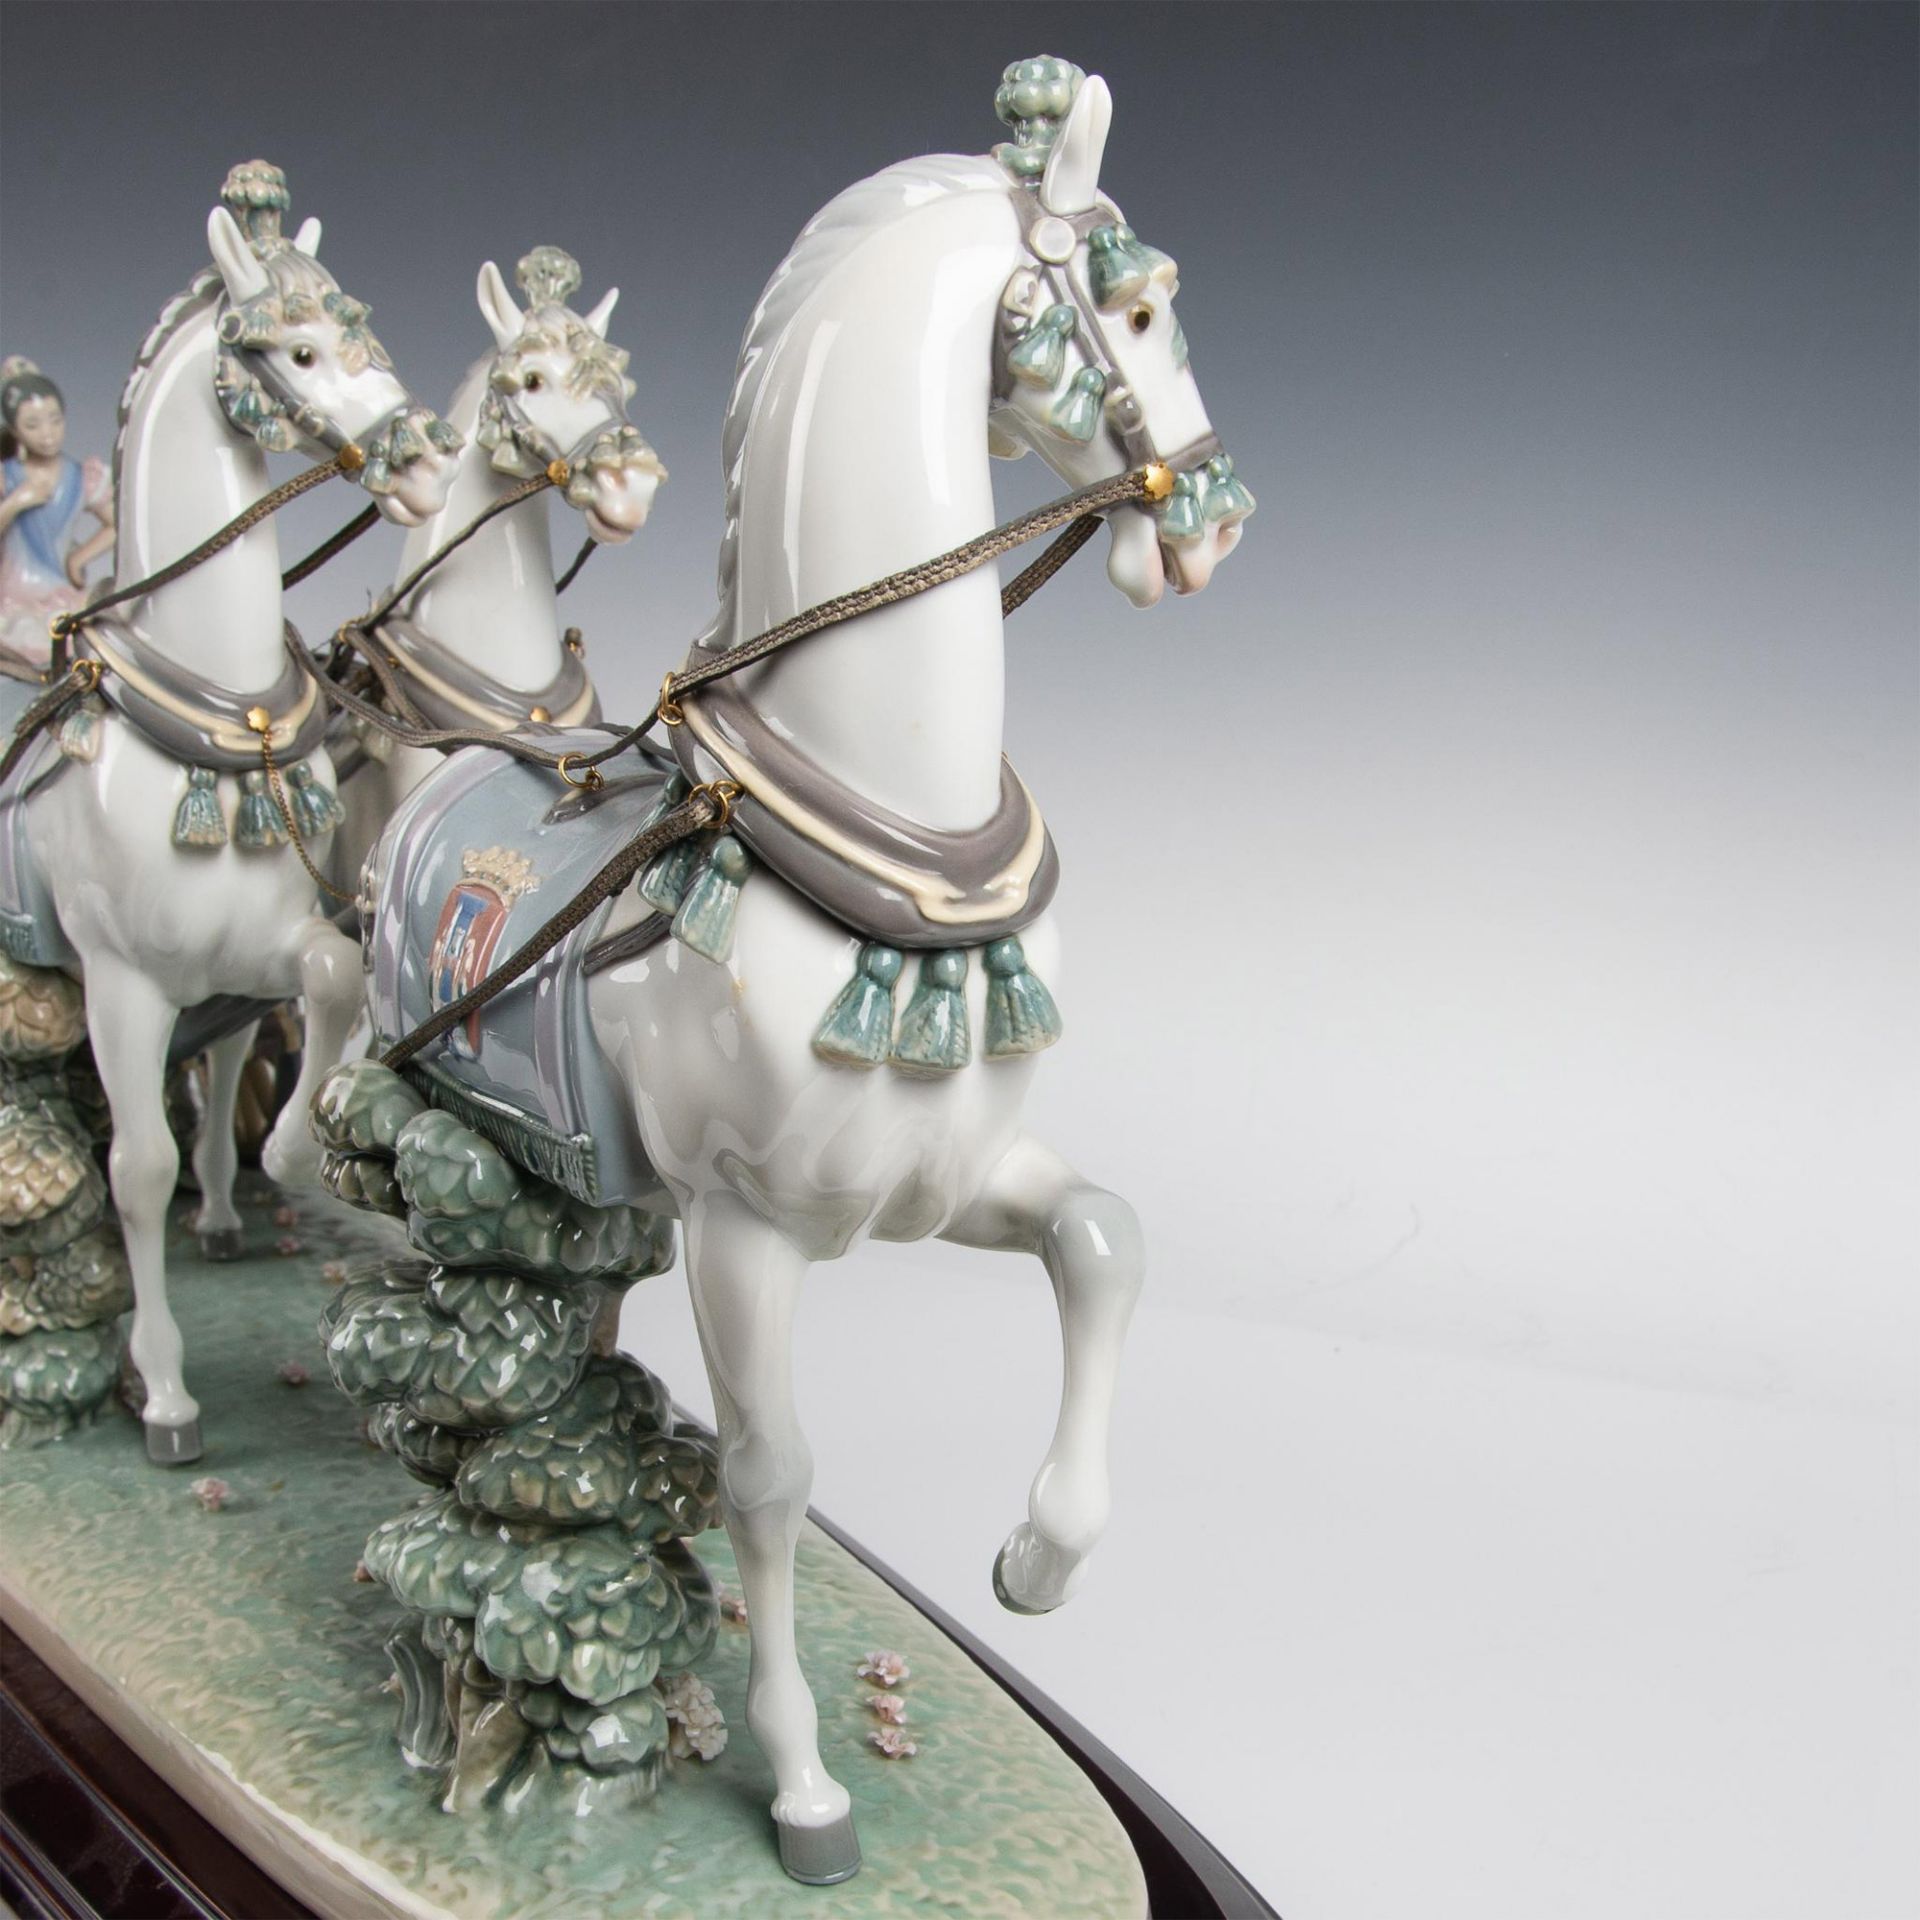 Lladro Porcelain Figurine, Outing in Seville 1001756 - Image 17 of 19